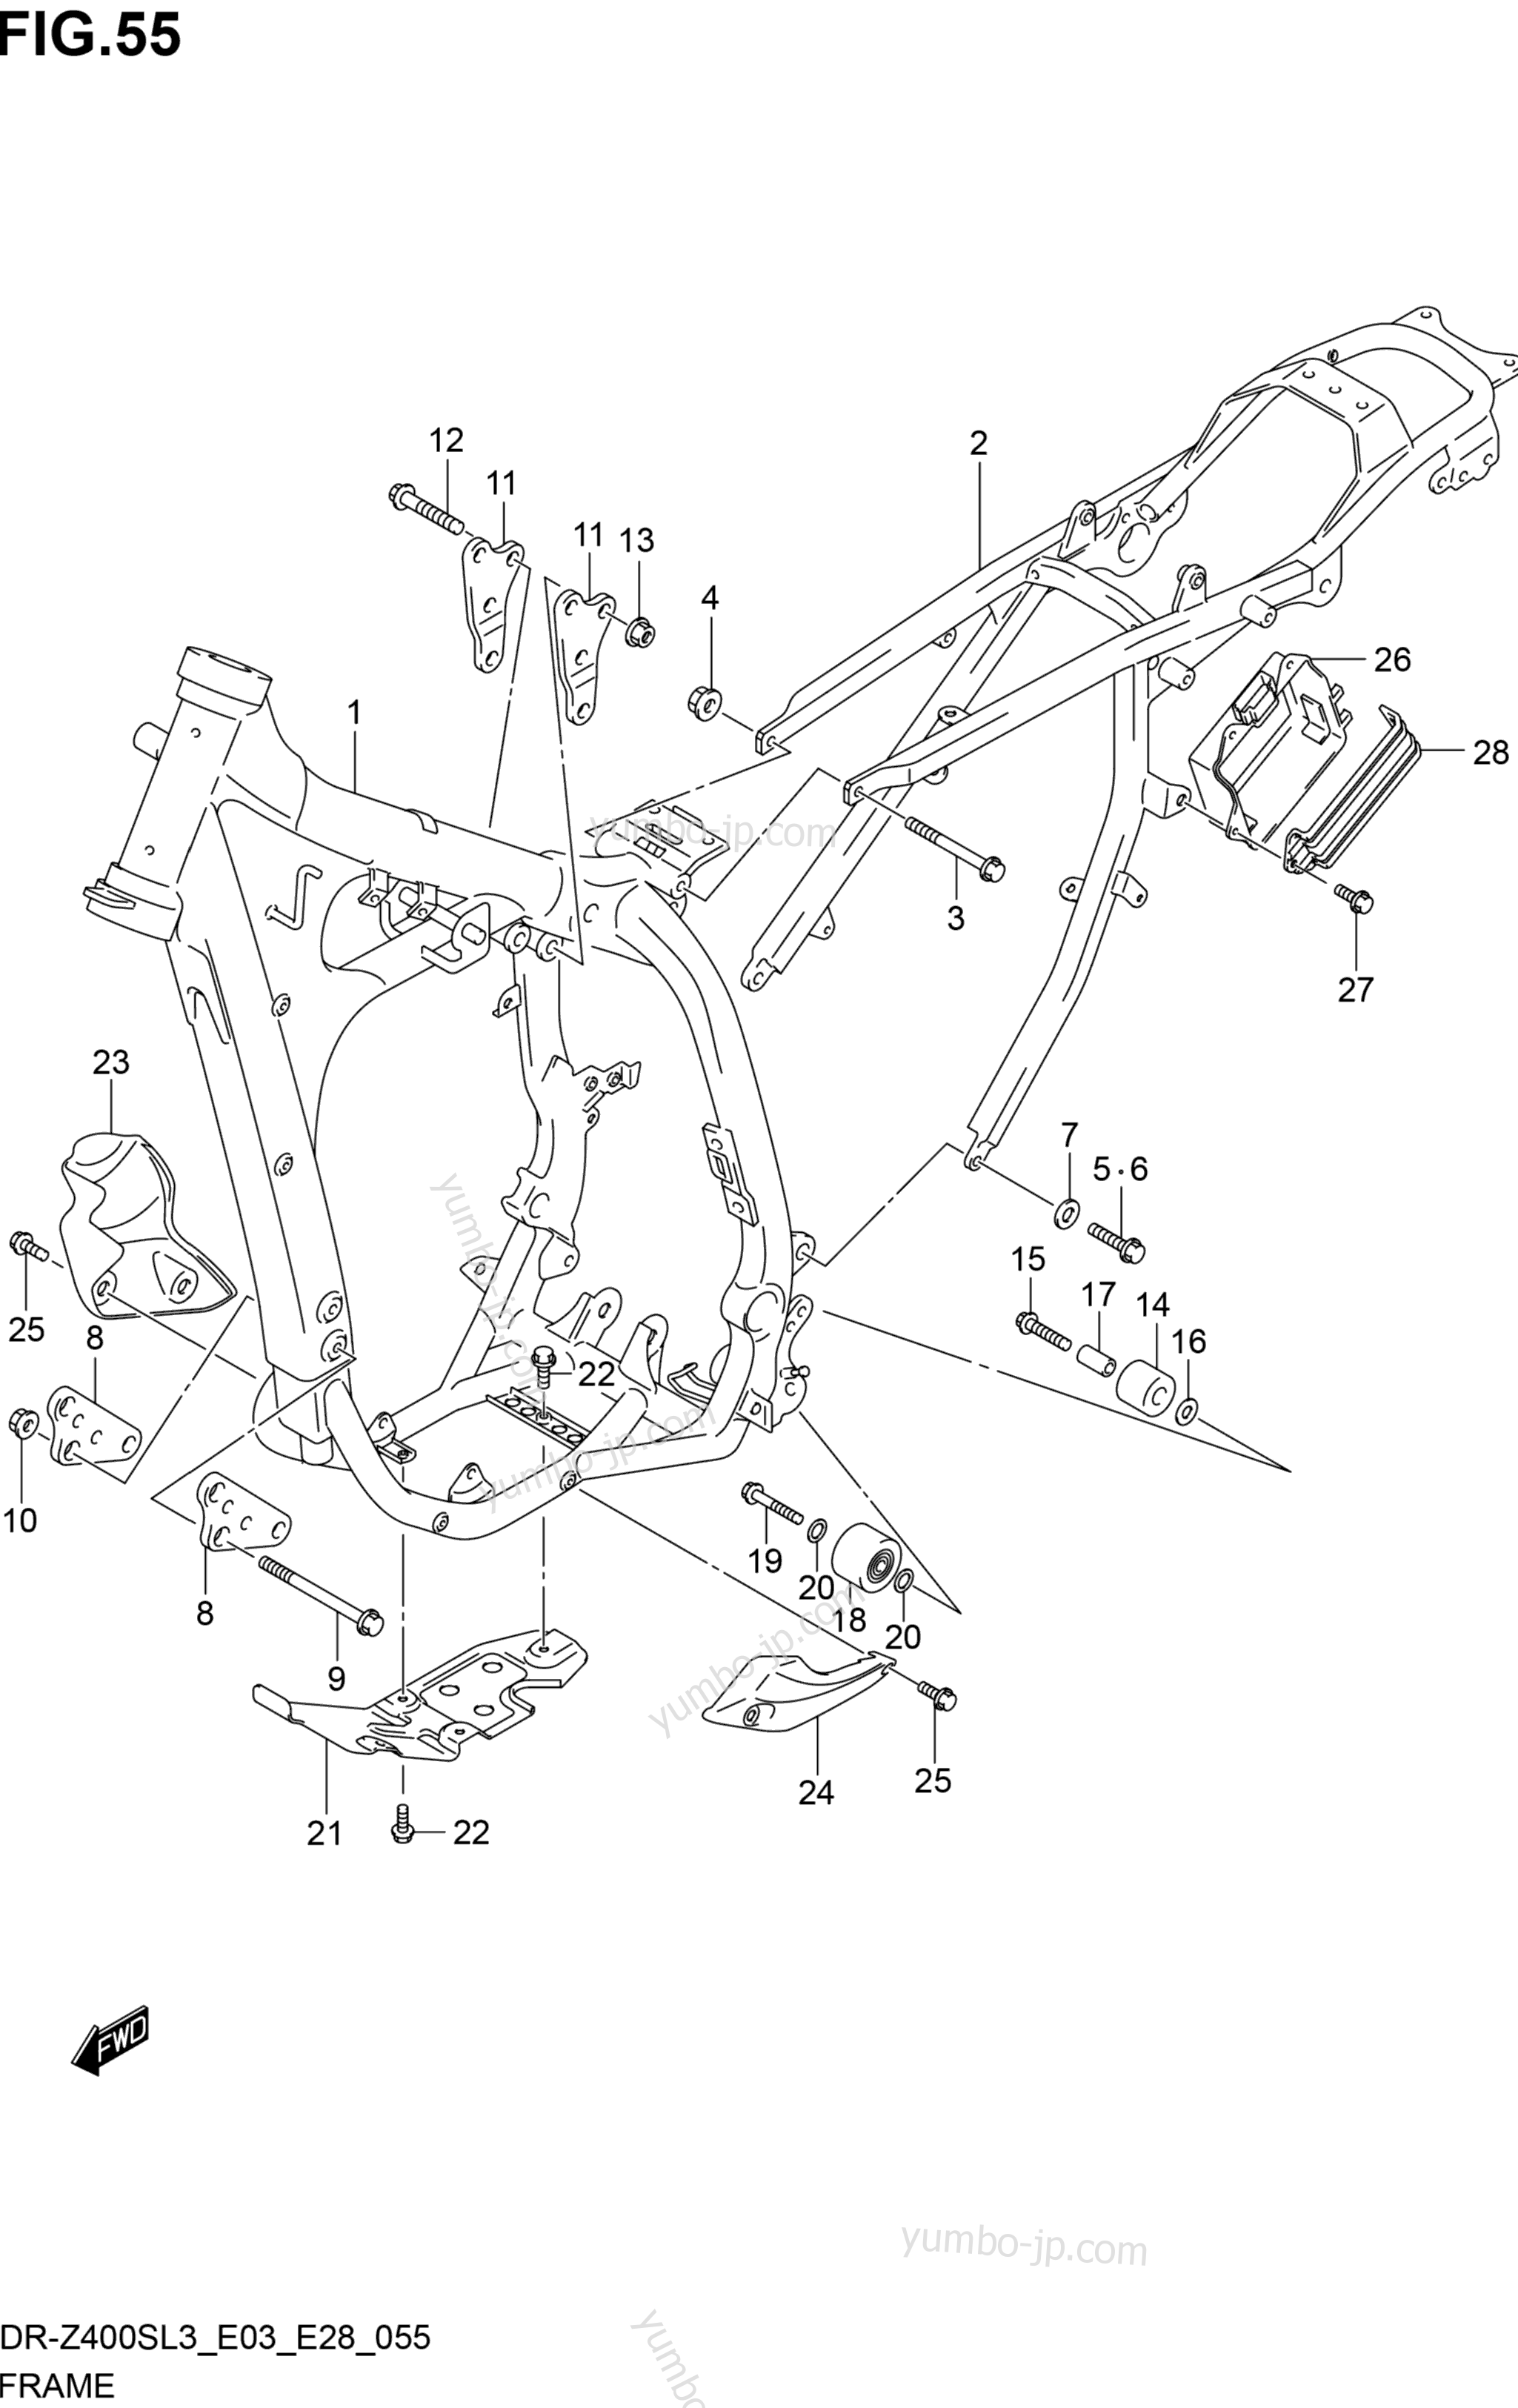 FRAME (DR-Z400SL3 E03) for motorcycles SUZUKI DR-Z400S 2013 year